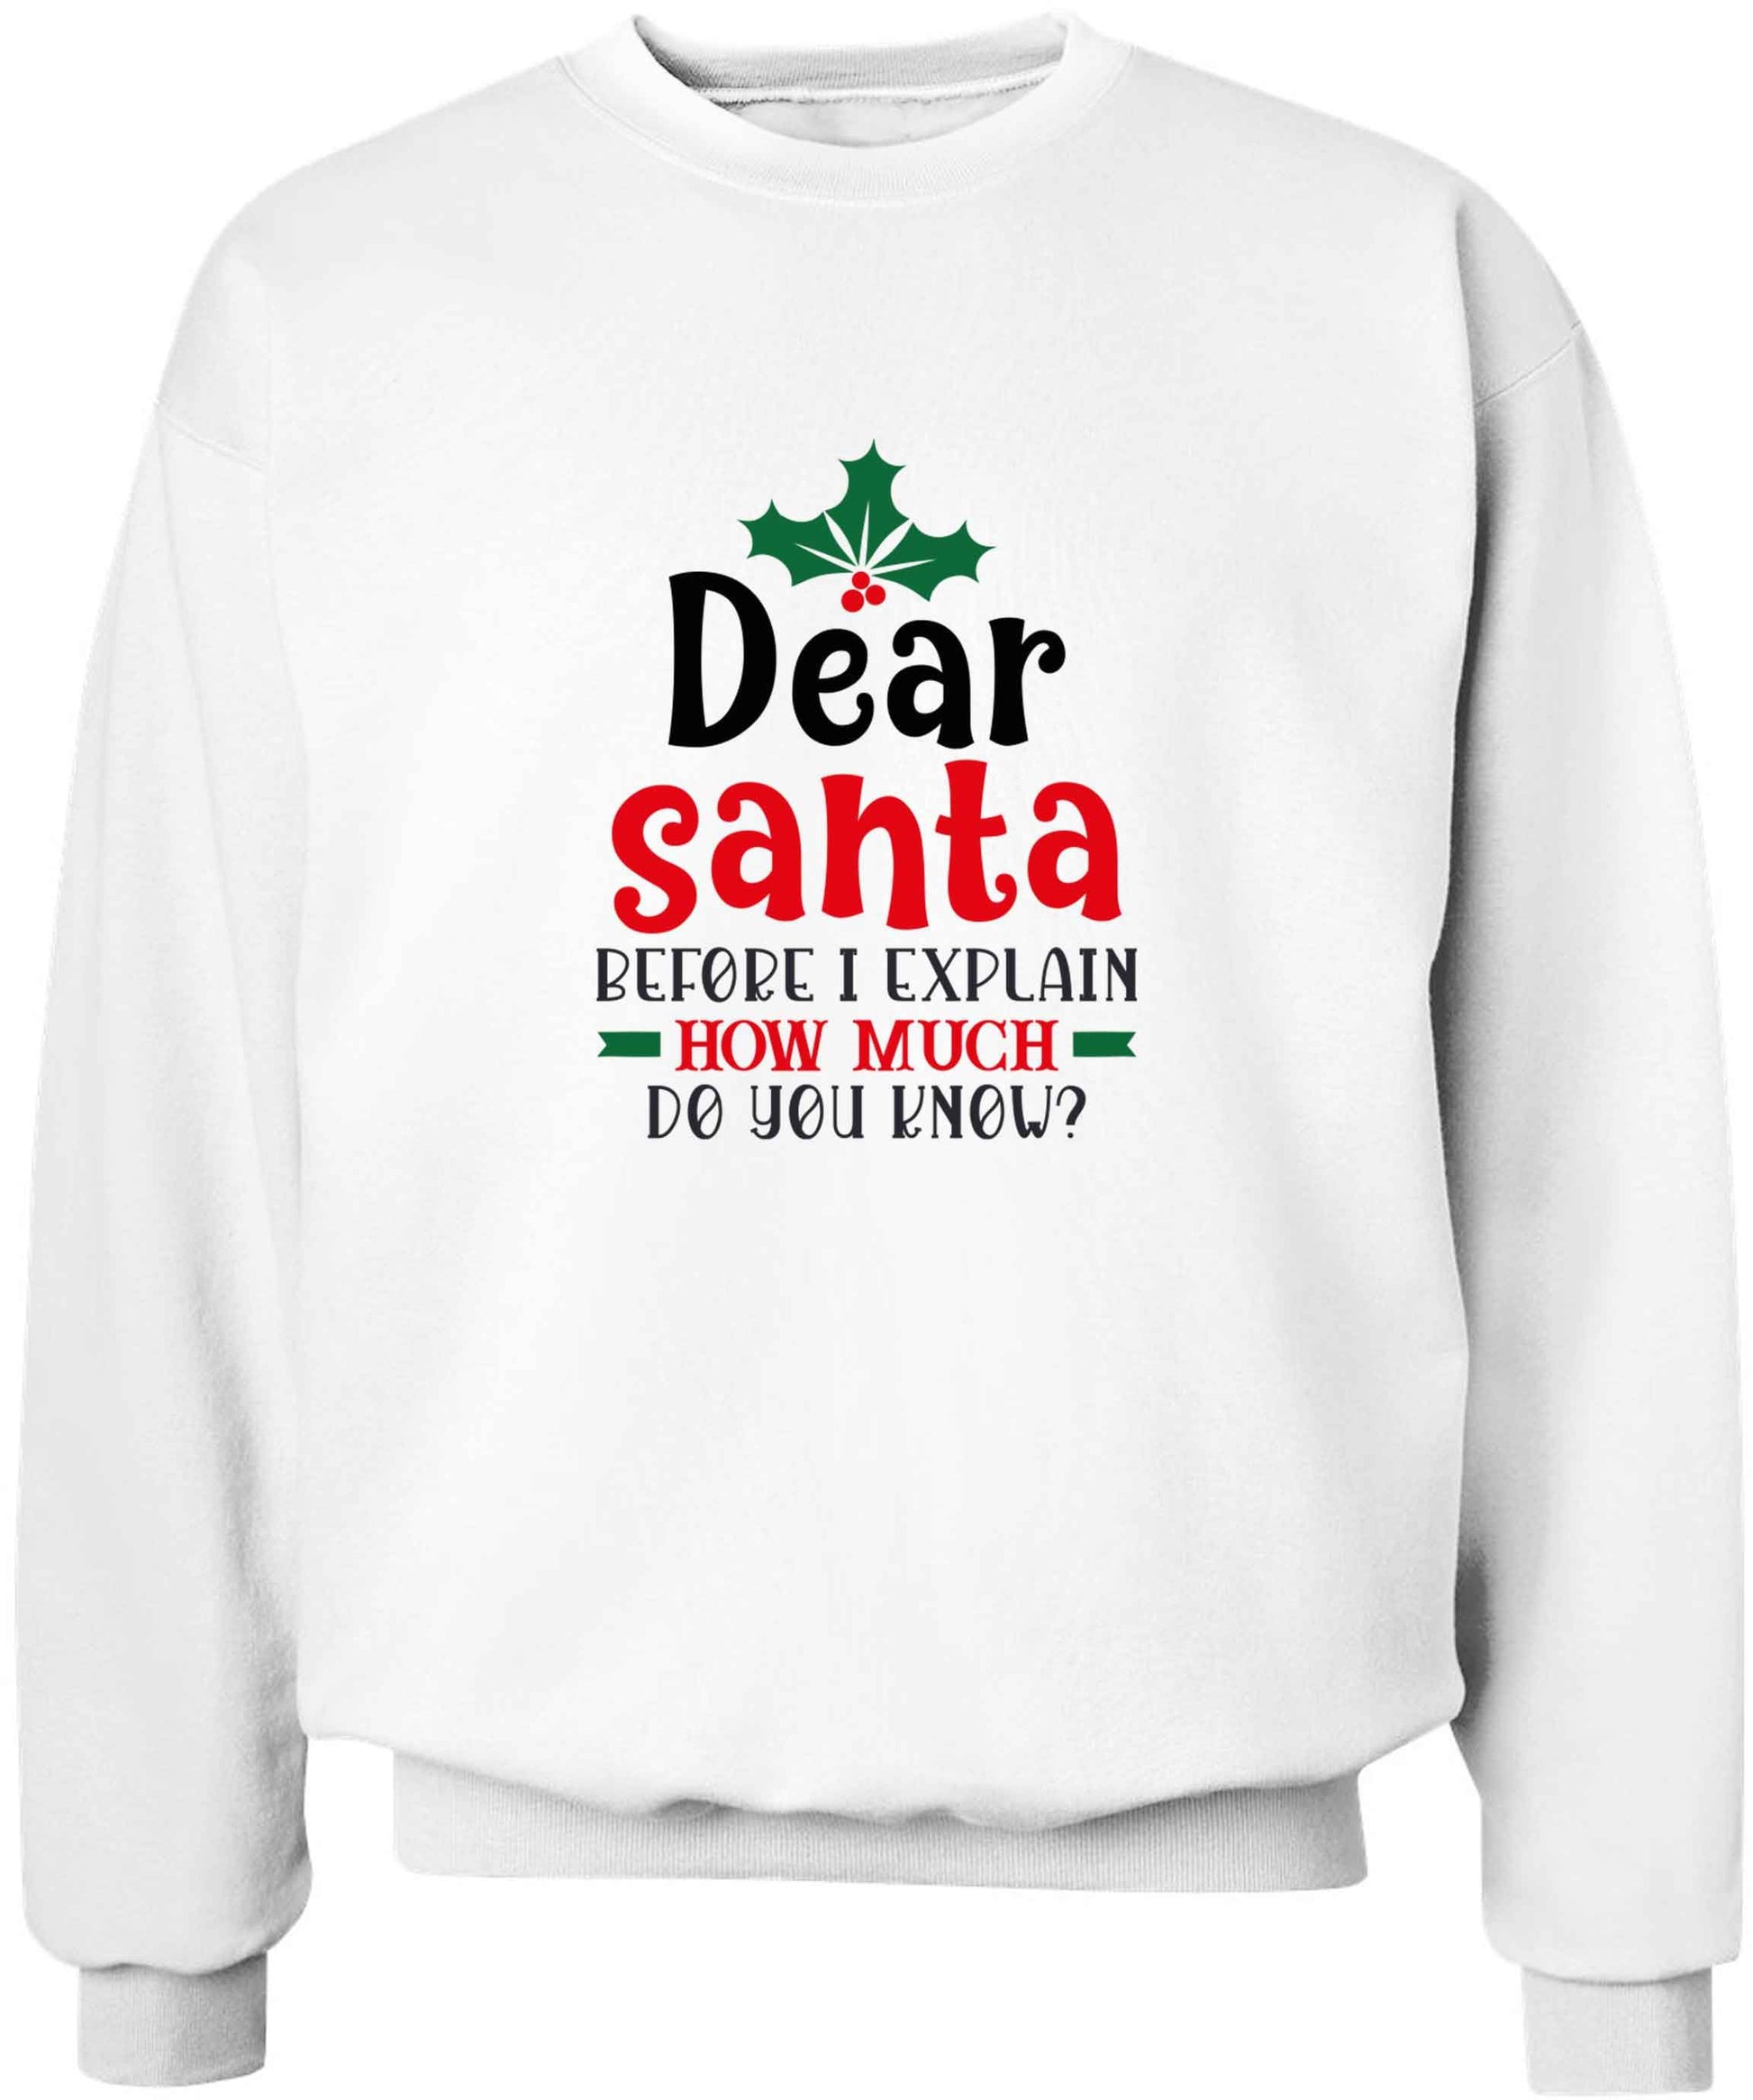 Santa before I explain how much do you know? adult's unisex white sweater 2XL